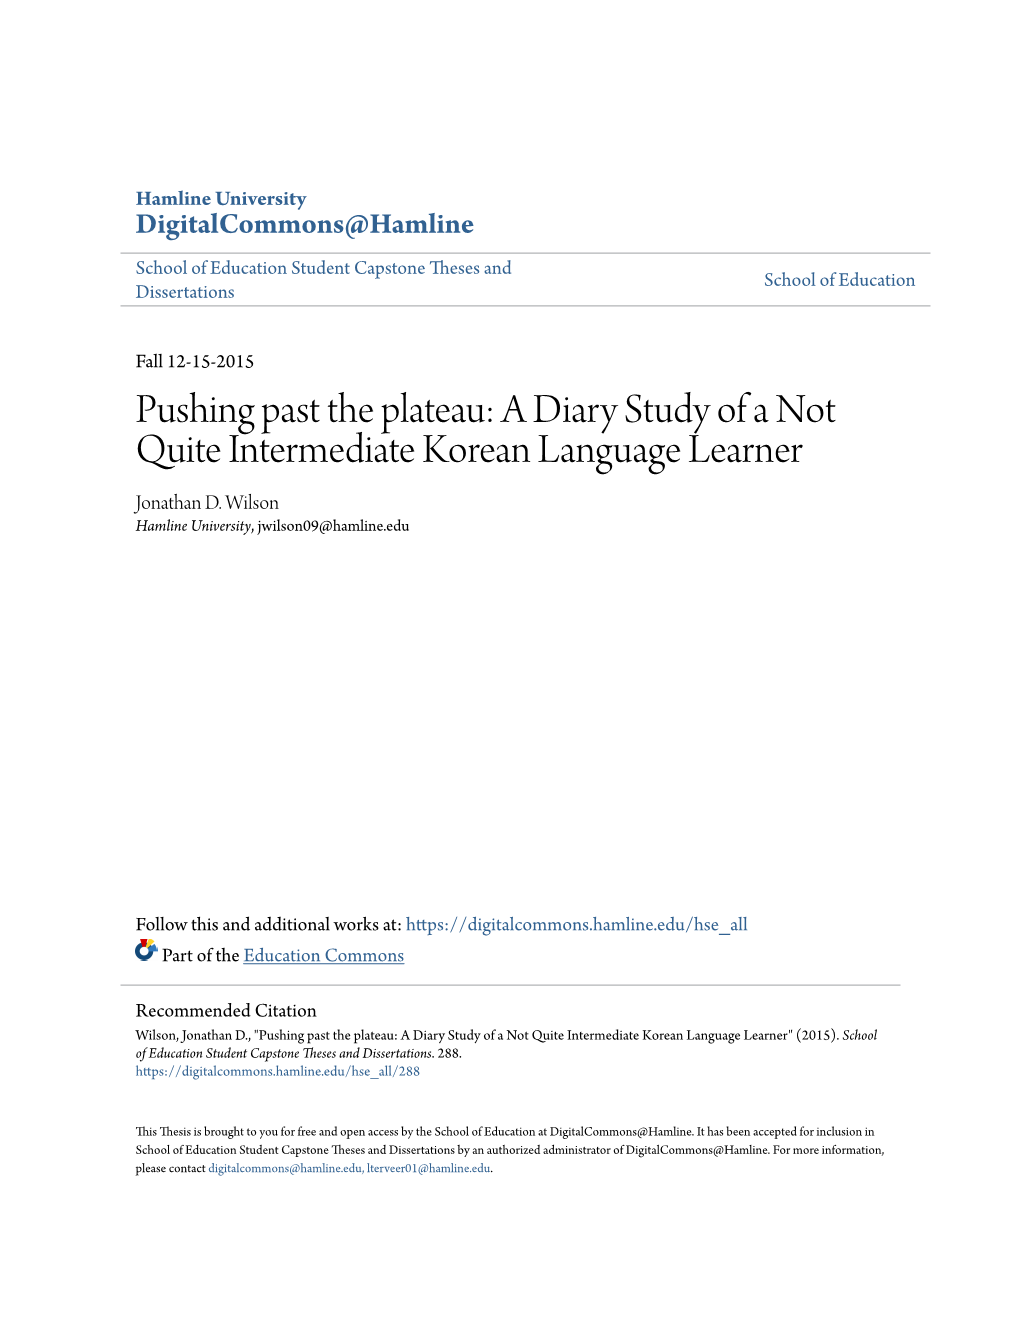 Pushing Past the Plateau: a Diary Study of a Not Quite Intermediate Korean Language Learner Jonathan D